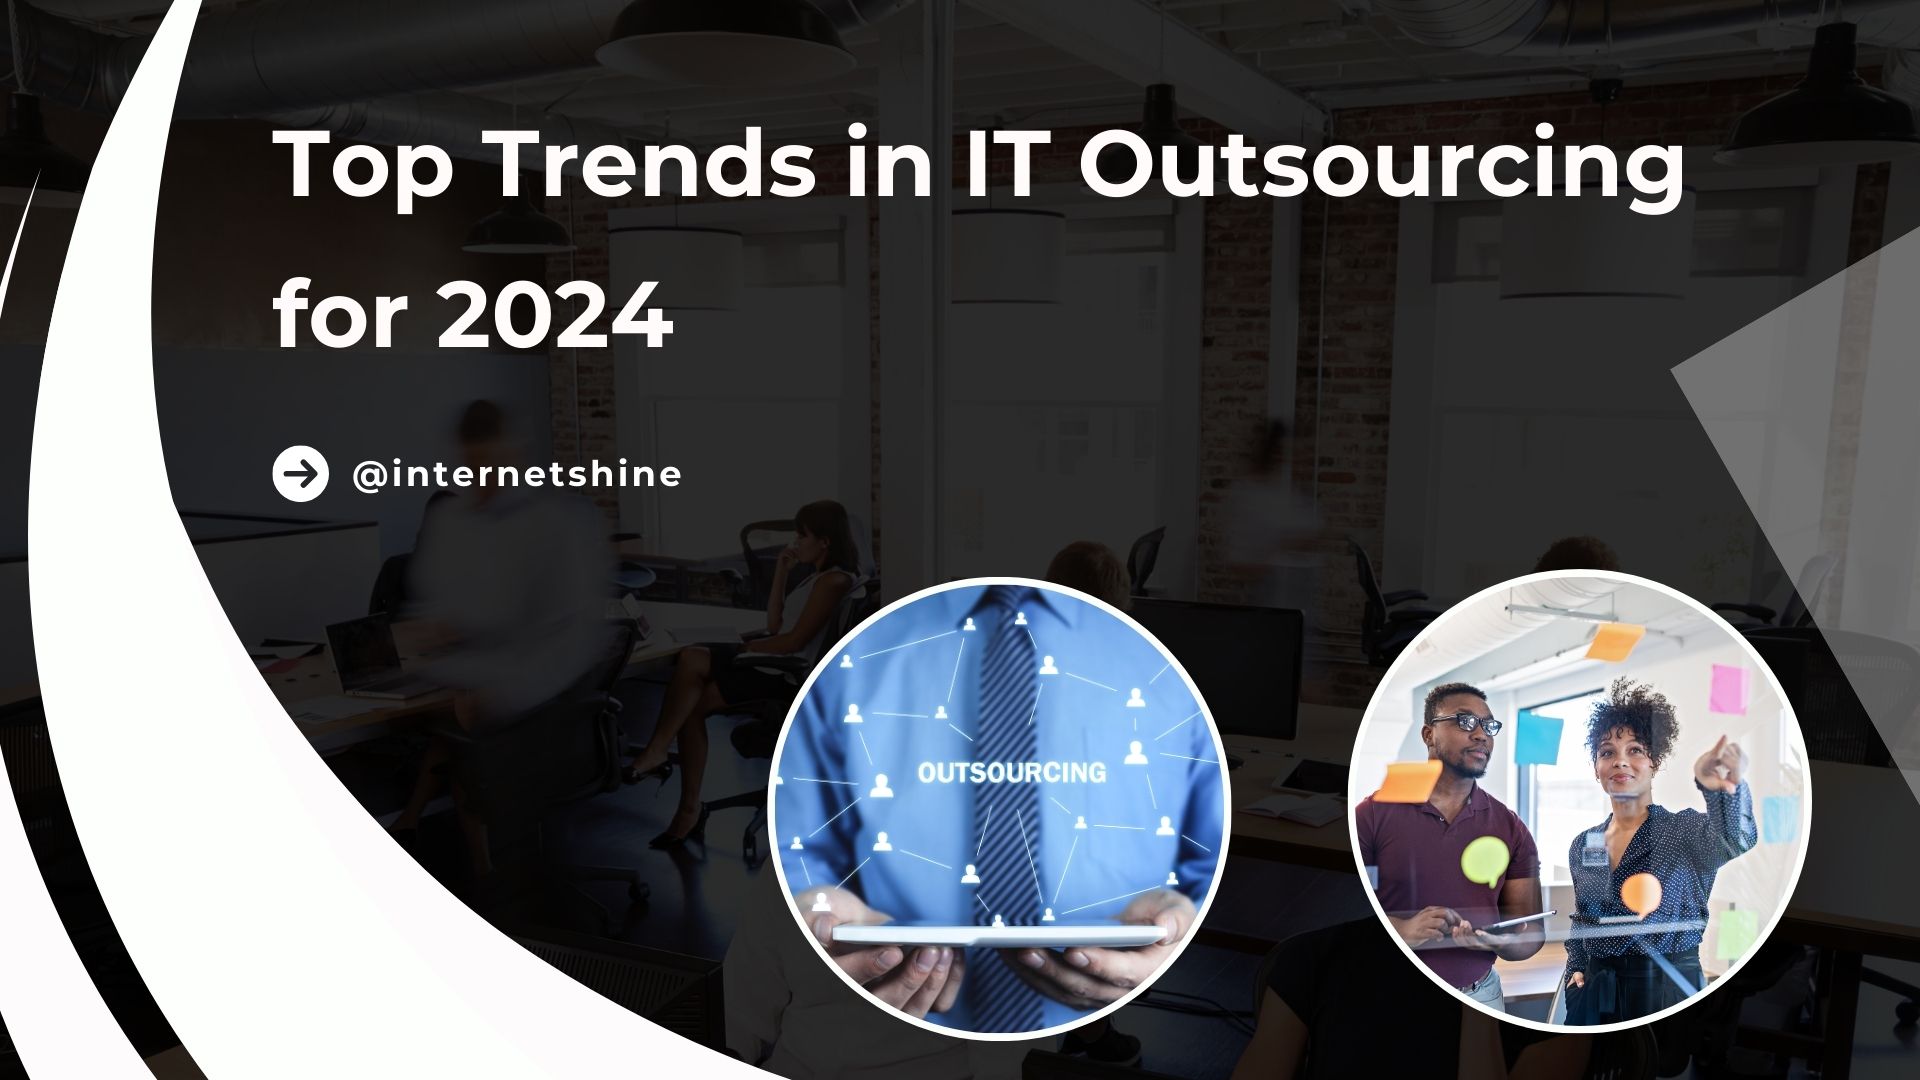 Top Trends in IT Outsourcing for 2024